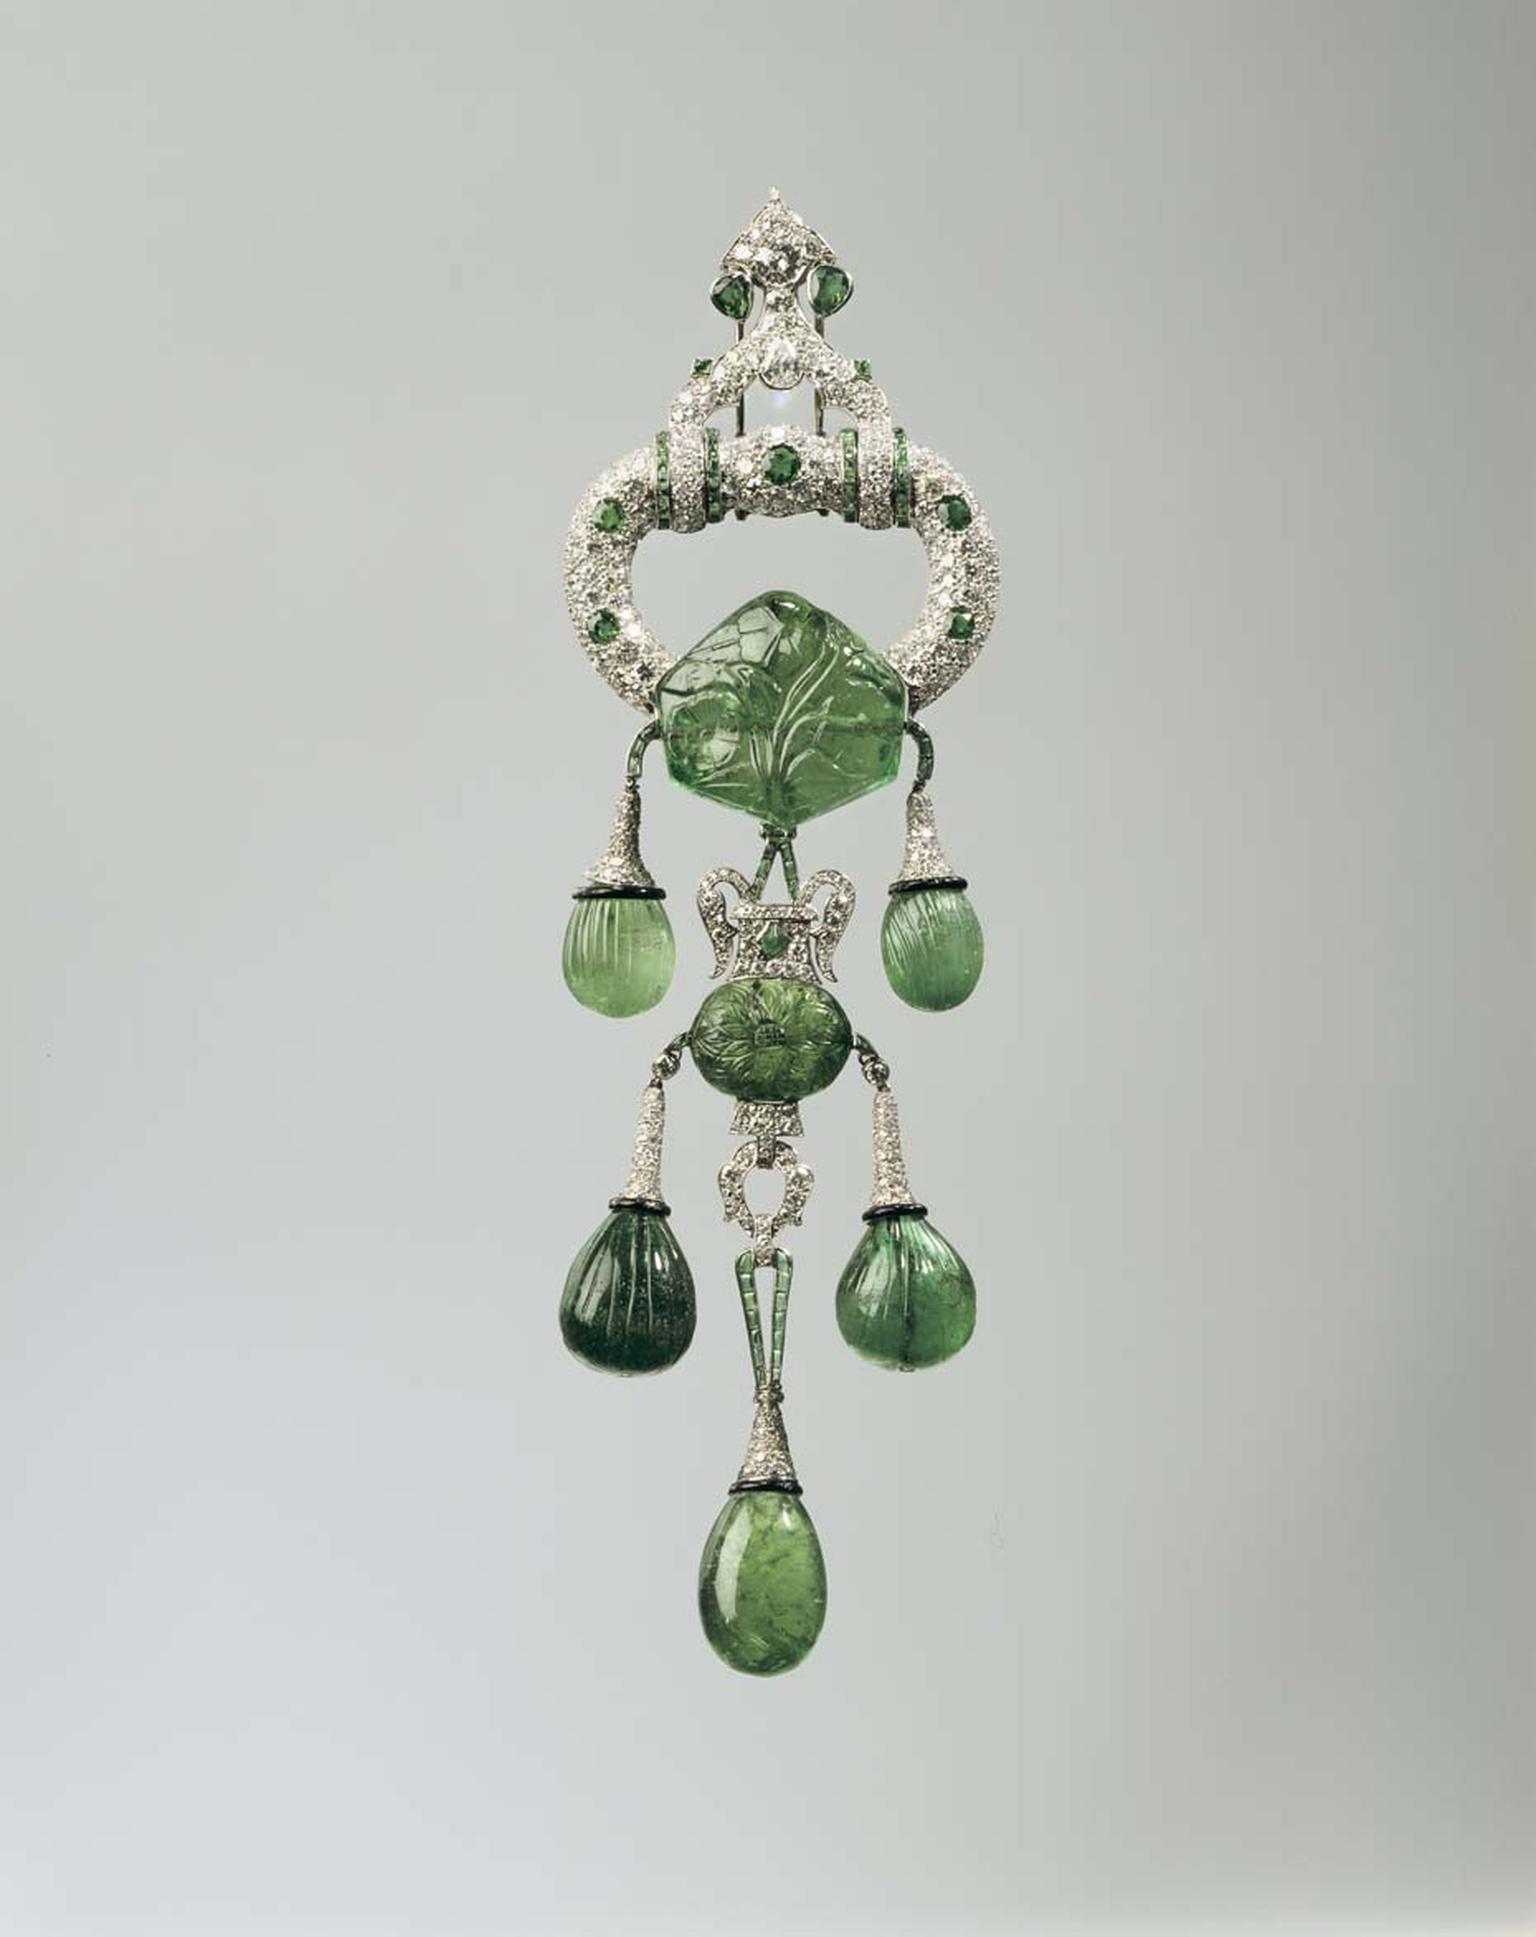 Cartier 1928 platinum pendant brooch with emeralds, diamonds and enamel. Image: Courtesy Hillwood Estate, Museum and Gardens.